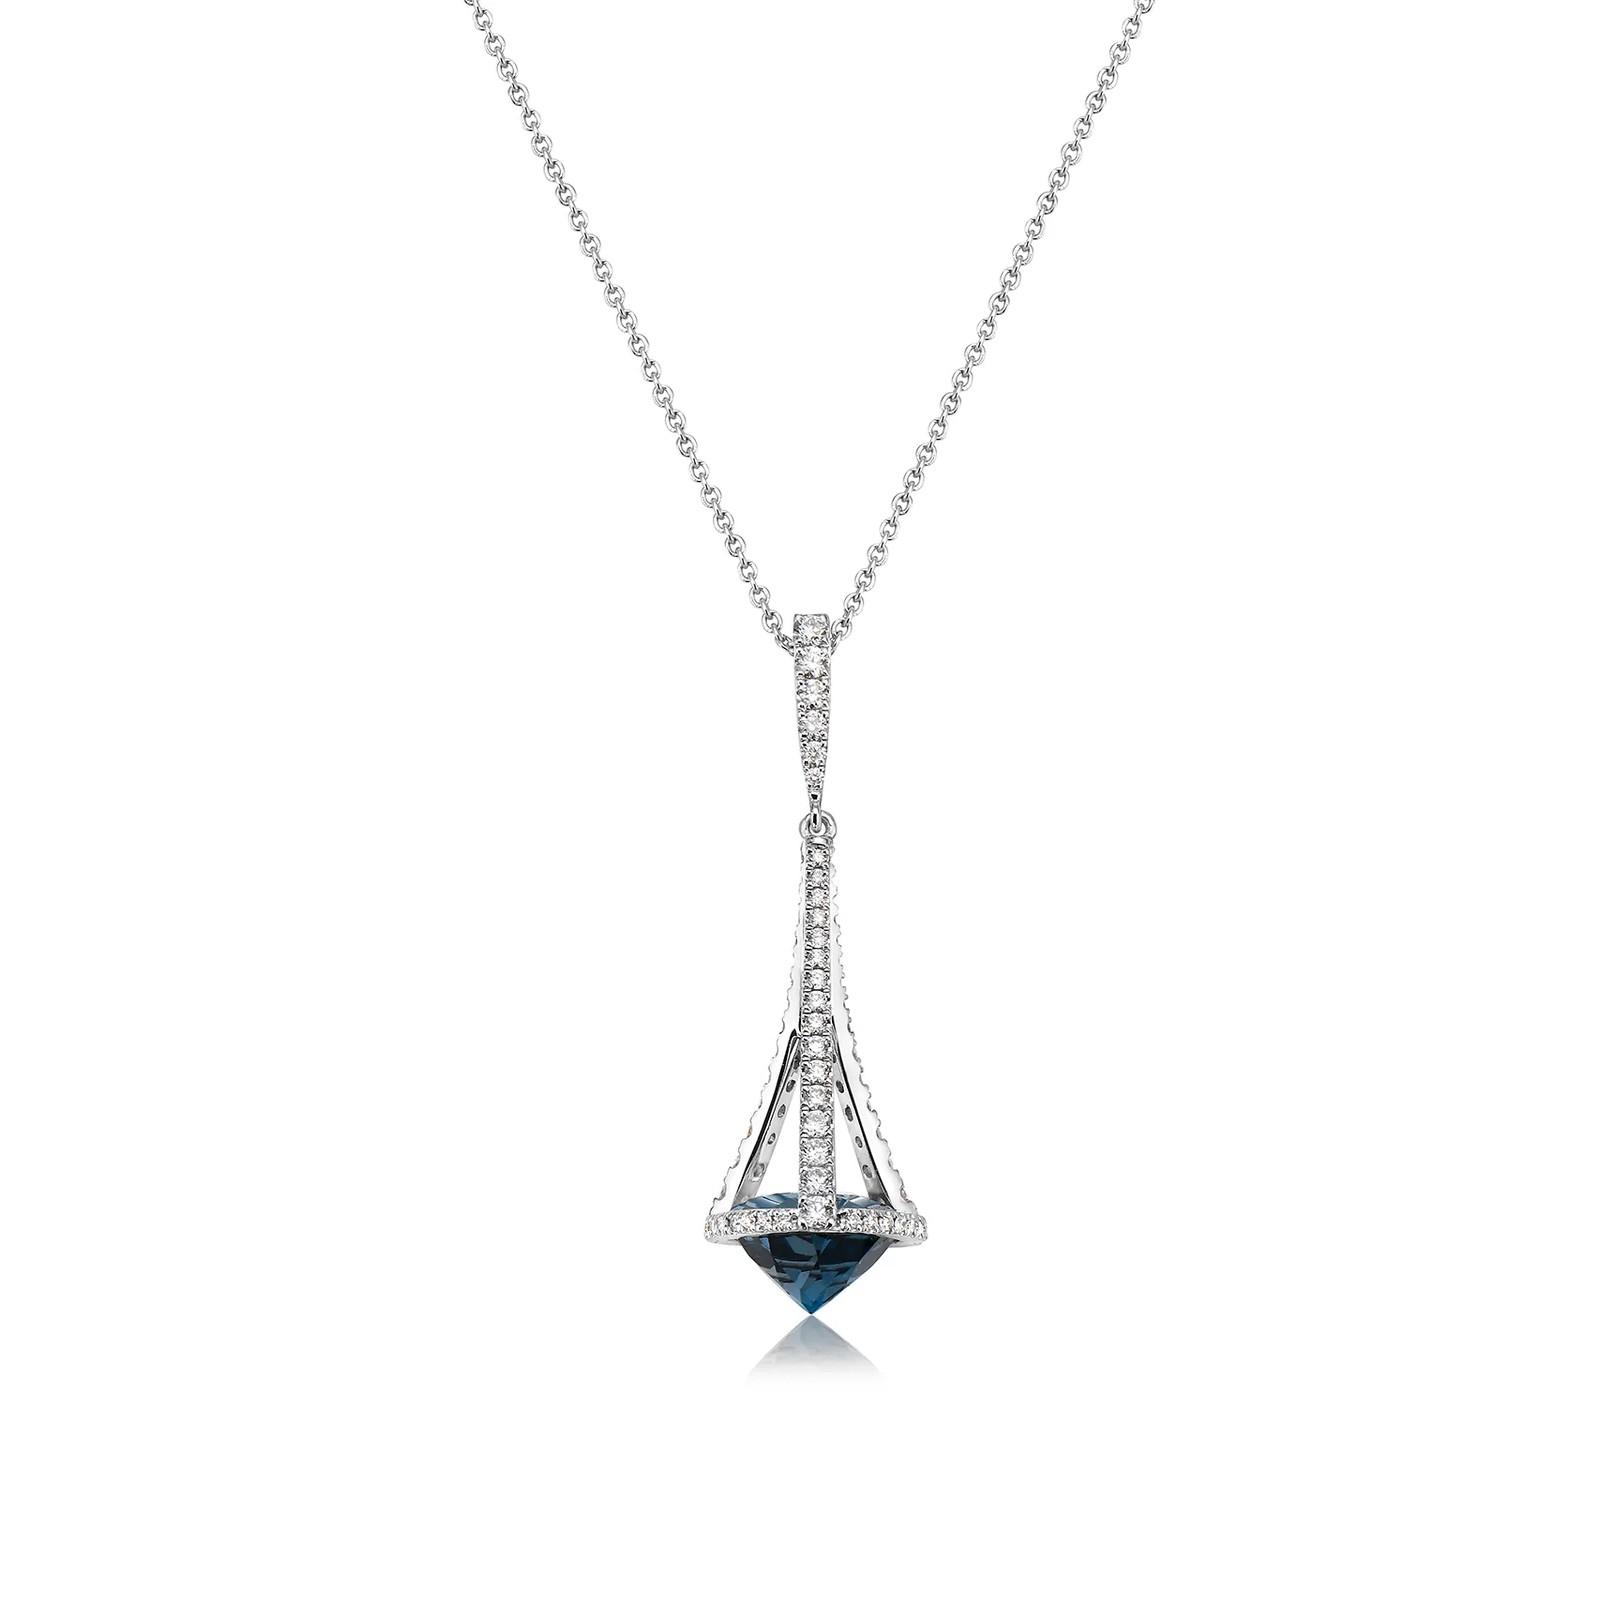 Charles Krypell London Blue Topaz and Diamond Chandelier Pendant Necklace